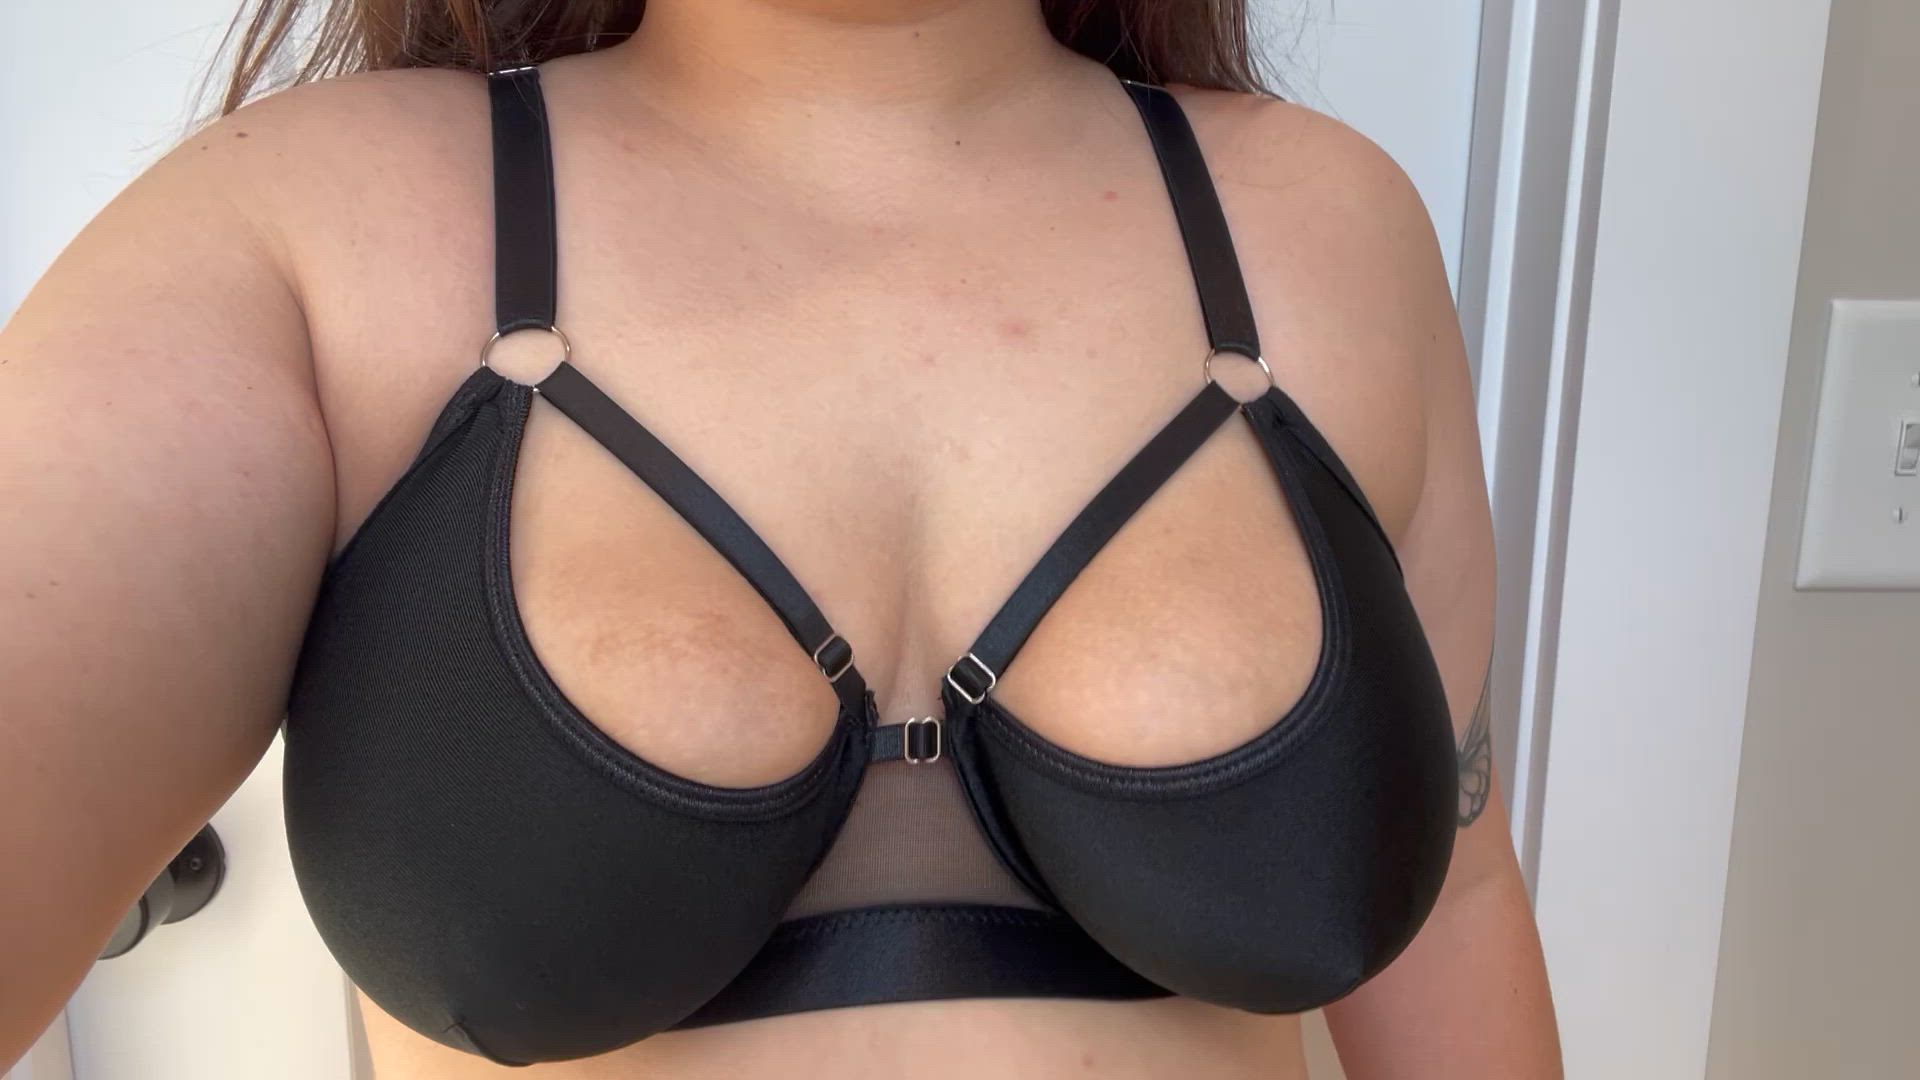 Big Tits porn video with onlyfans model camilapaige42 <strong>@camilapaige42</strong>